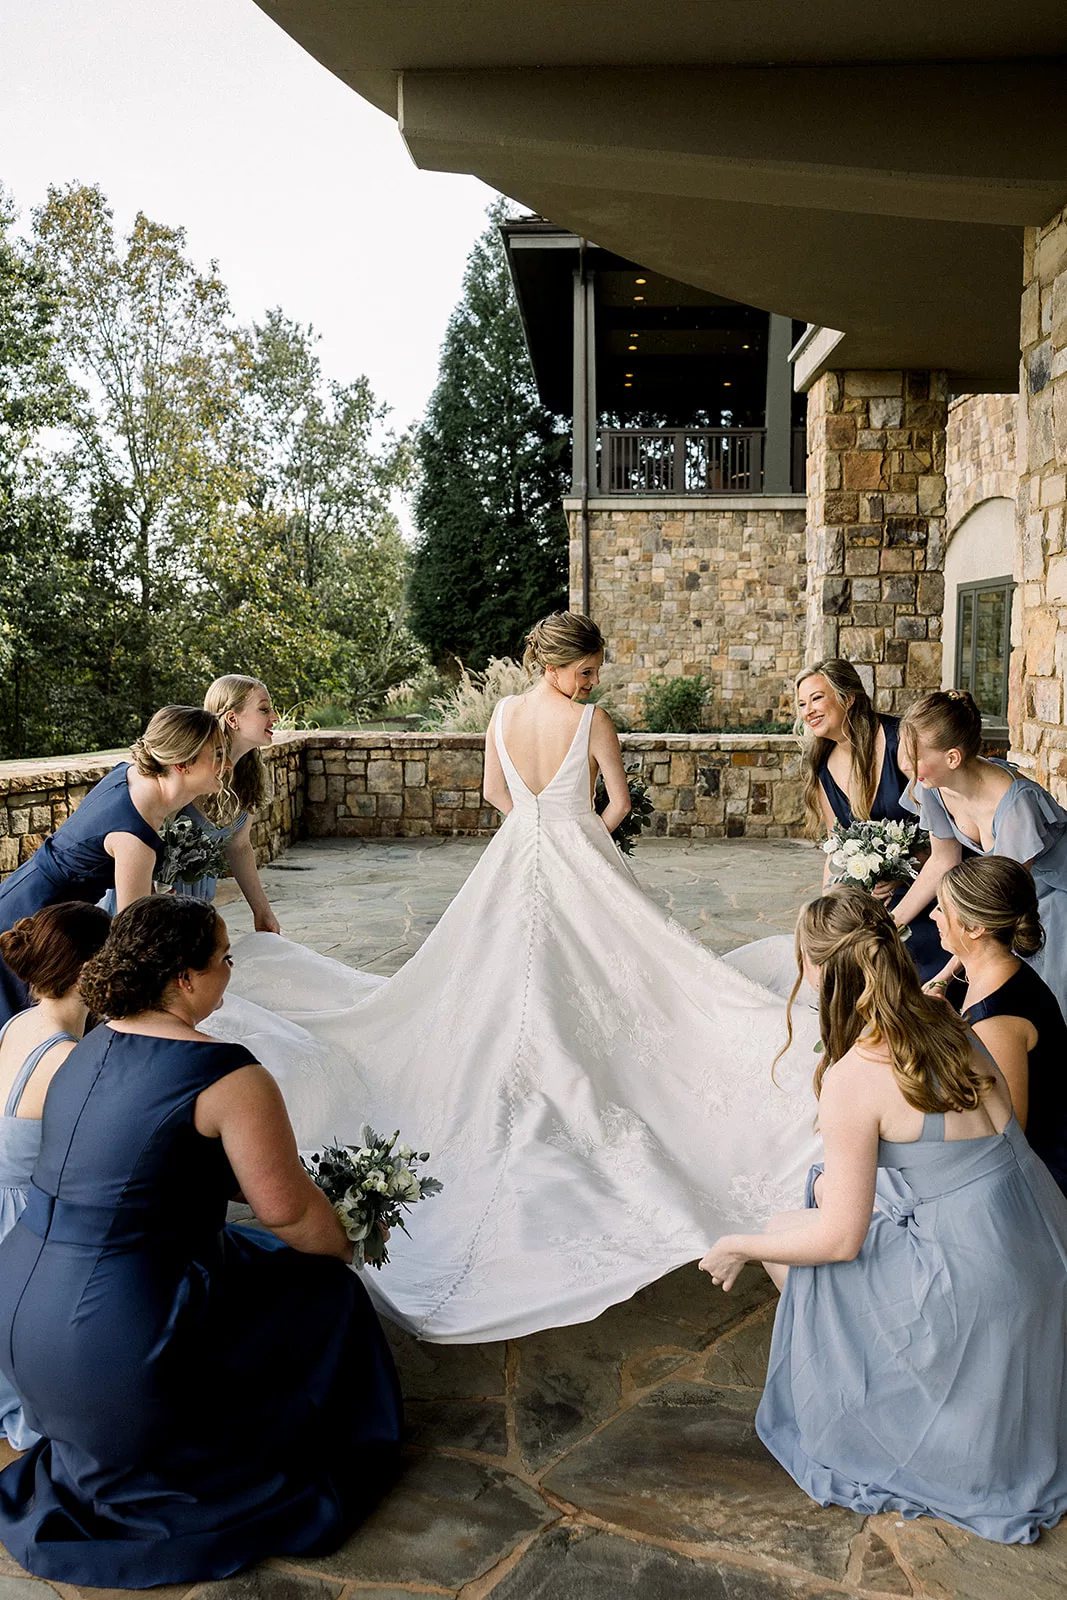 A bride stands while her bridal party spreads out her dress